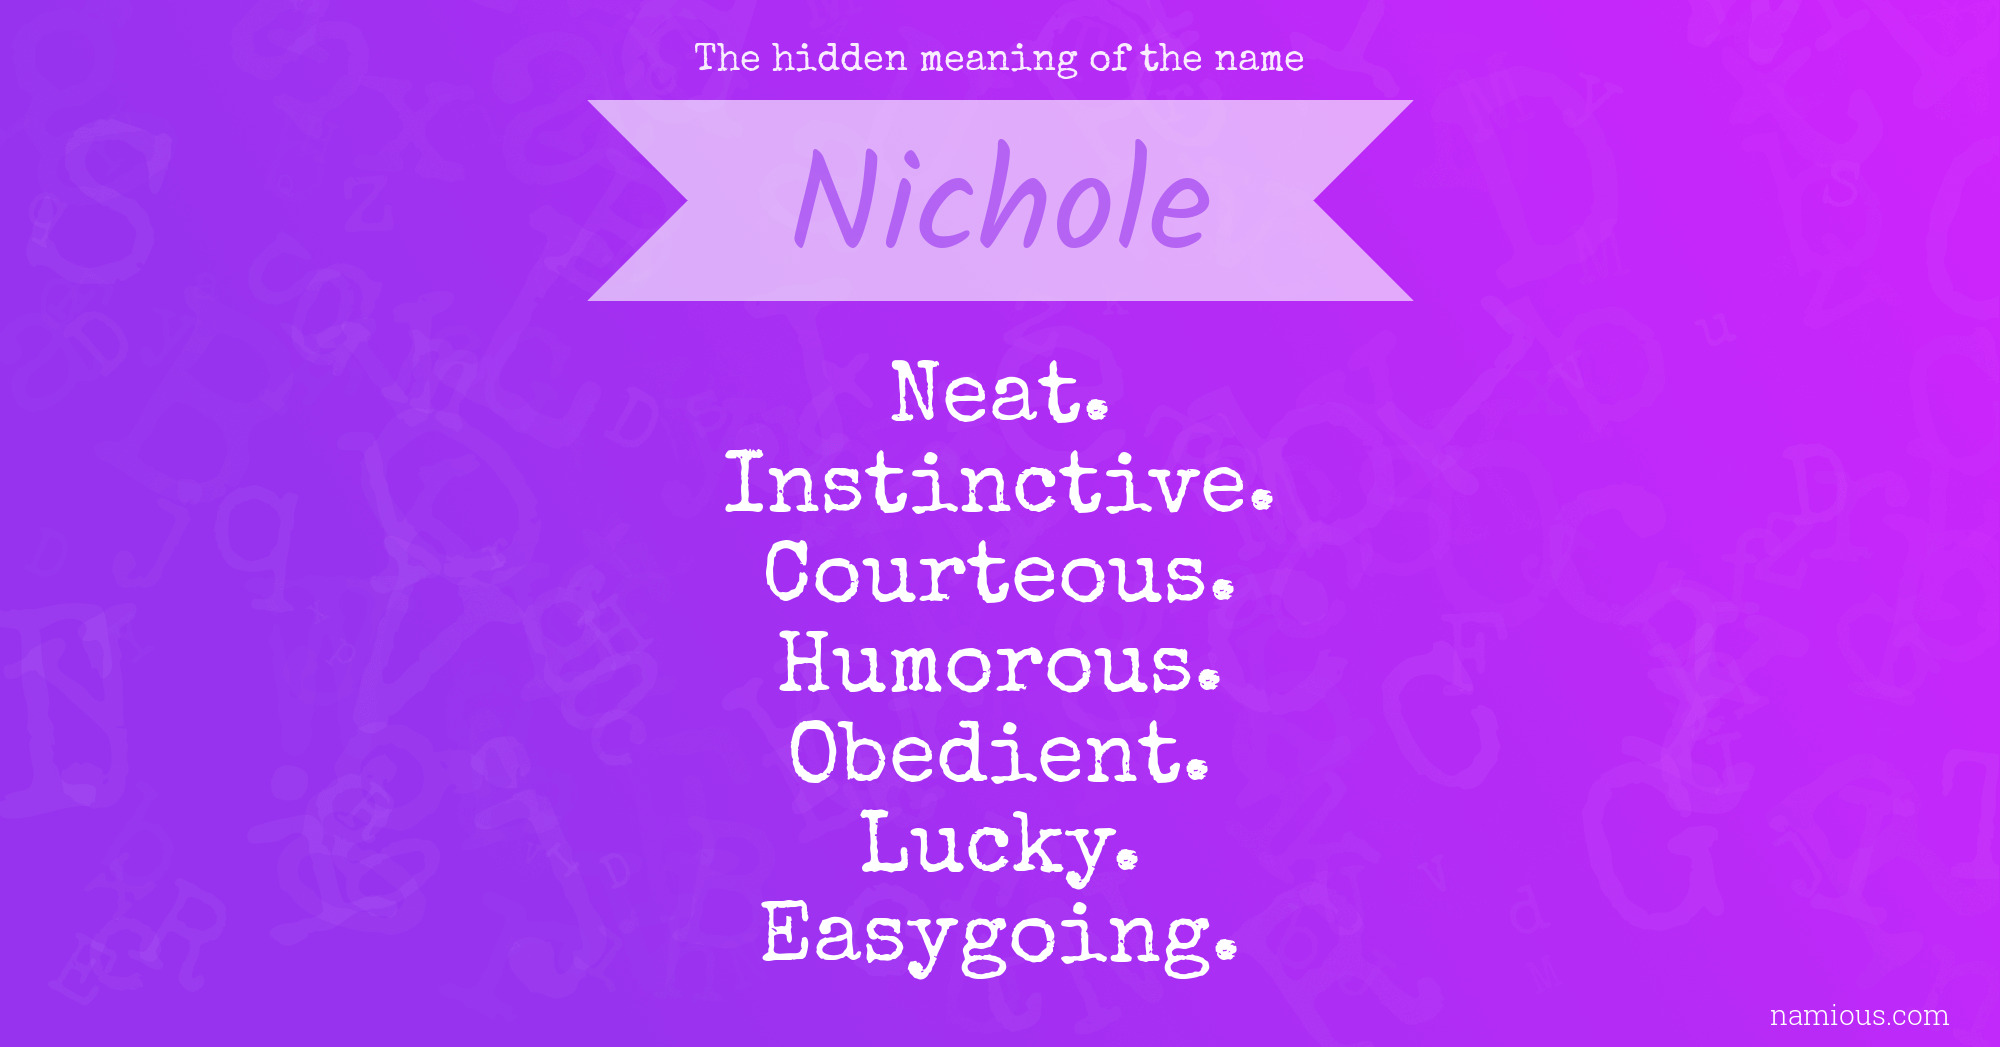 The hidden meaning of the name Nichole